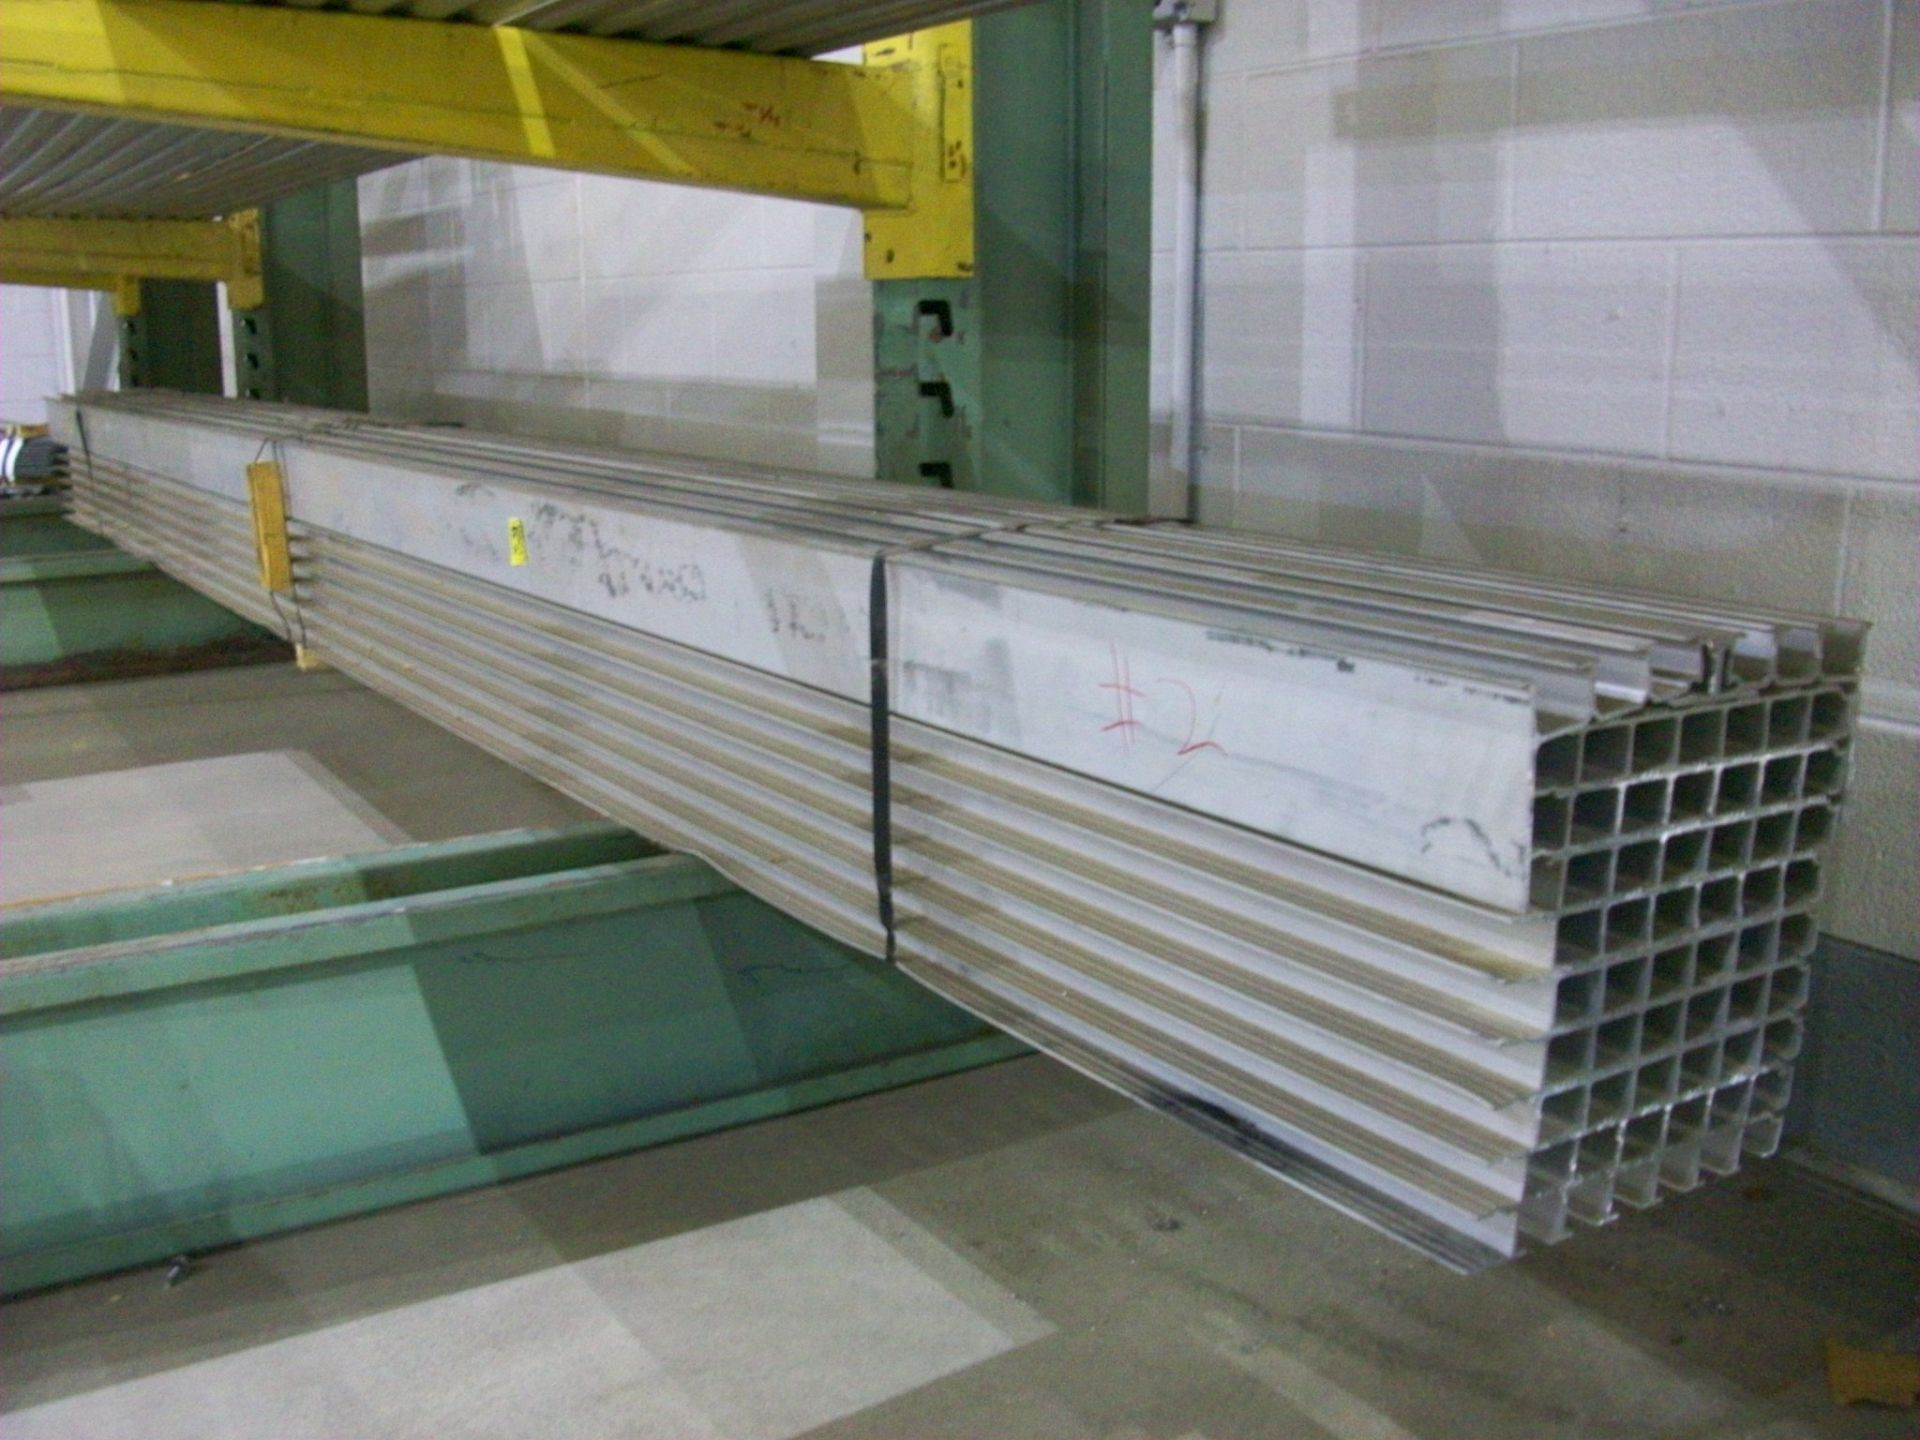 Lot-Aluminum Extrusion and Corrugated Galvanized Materials on (1) Rack, (Rack Not Included) - Image 5 of 17